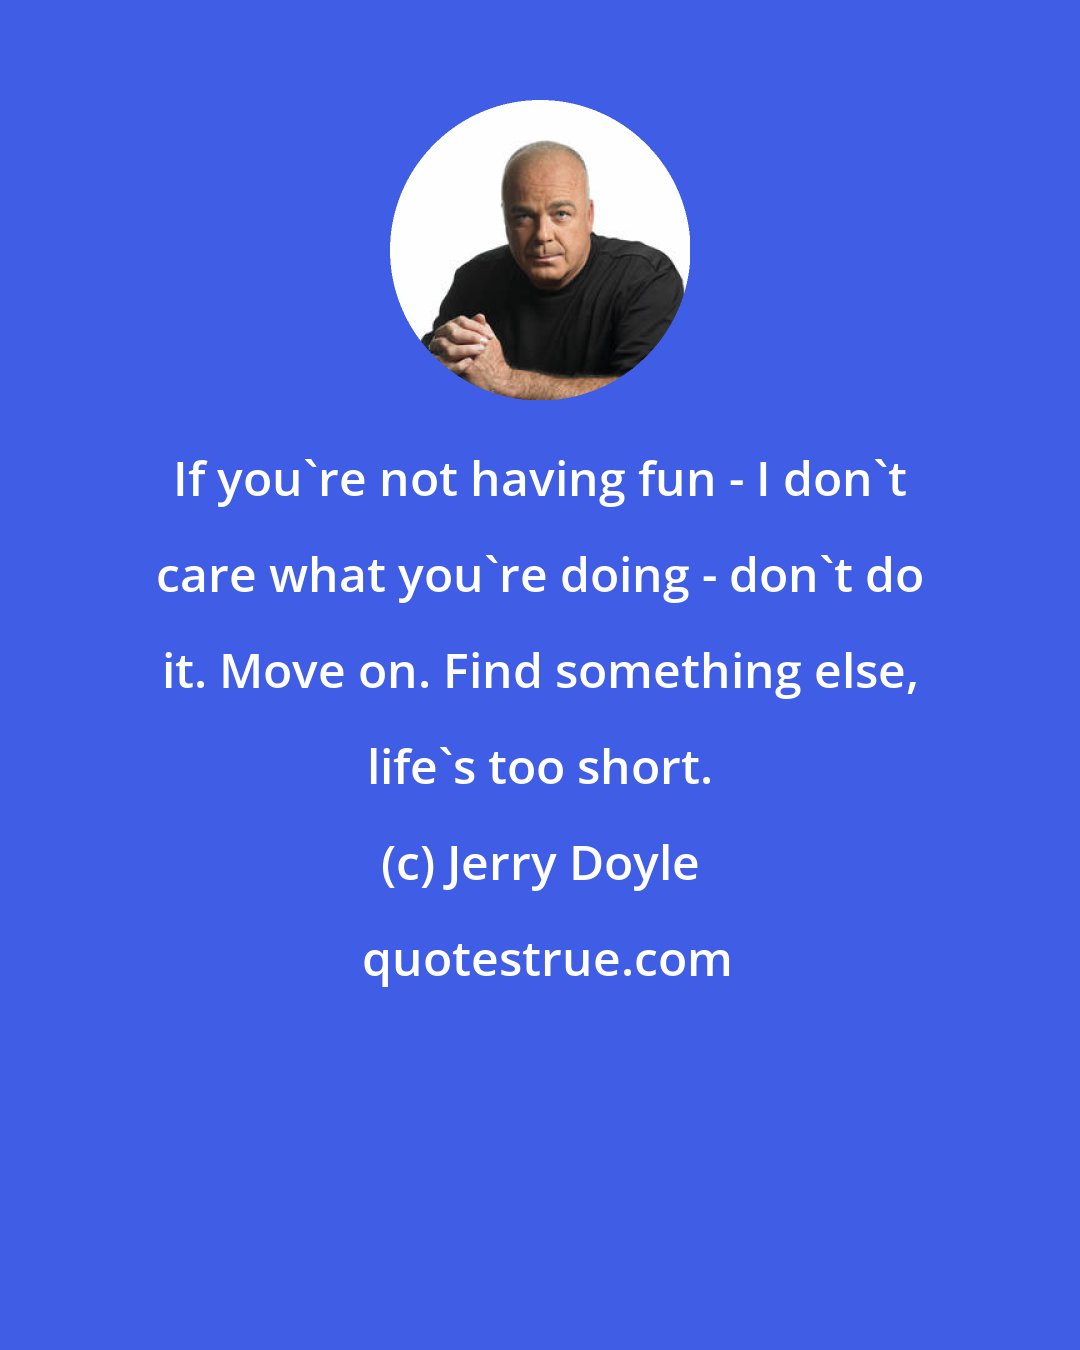 Jerry Doyle: If you're not having fun - I don't care what you're doing - don't do it. Move on. Find something else, life's too short.